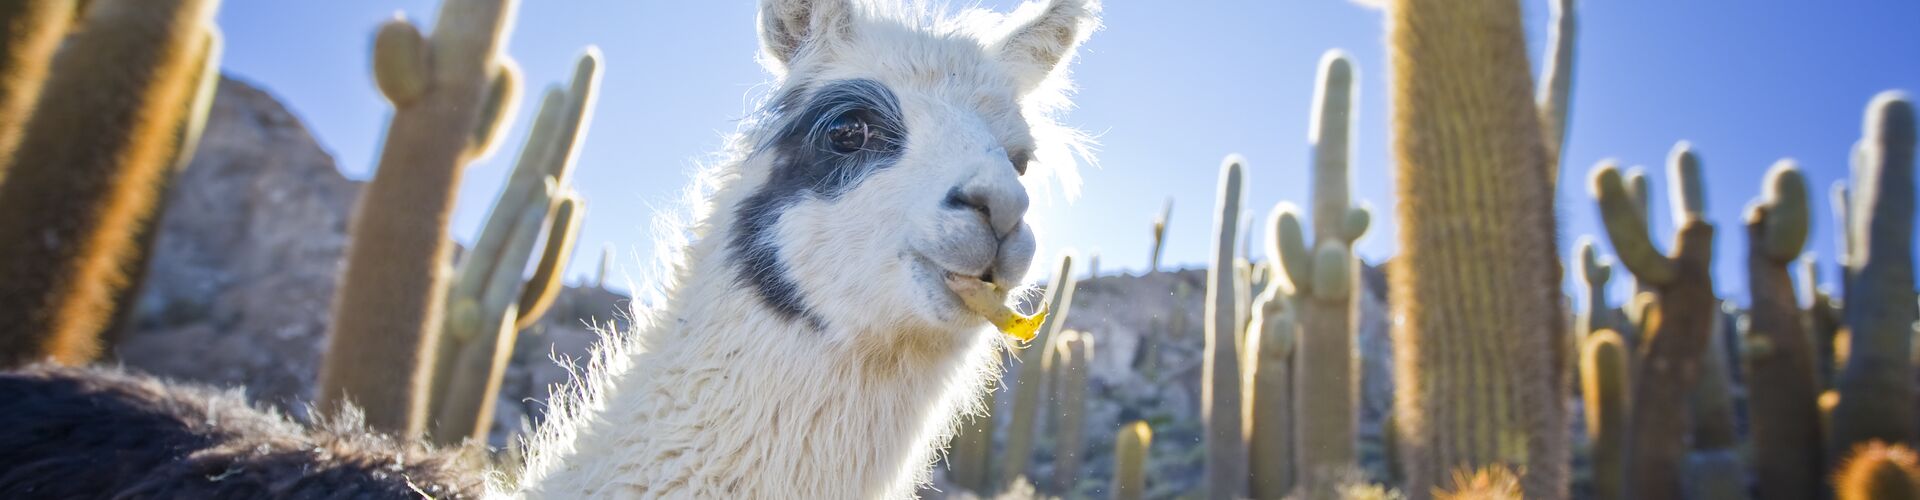 A Bolivian llama among the cactus in South America